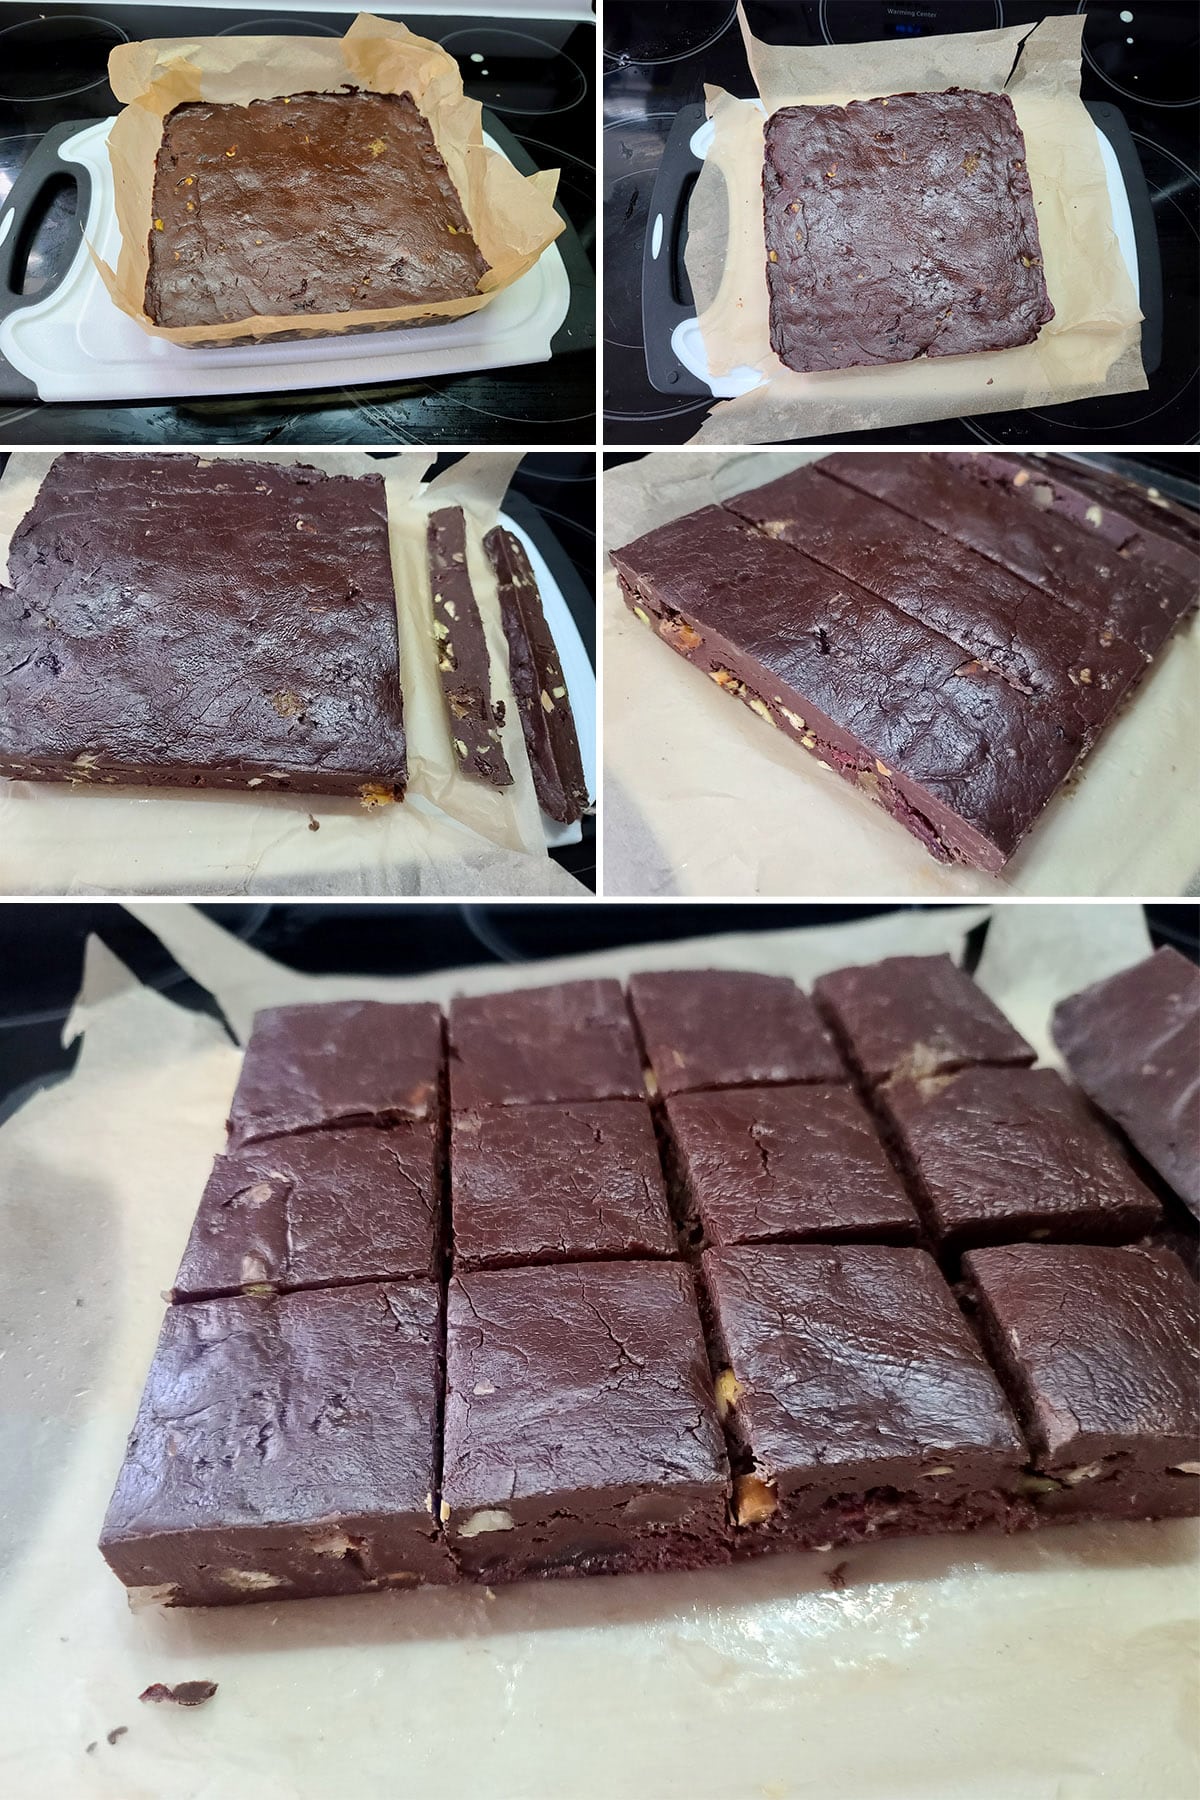 A 5 part image showing the slab of chilled fudge being lifted from the pan and cut into squares.